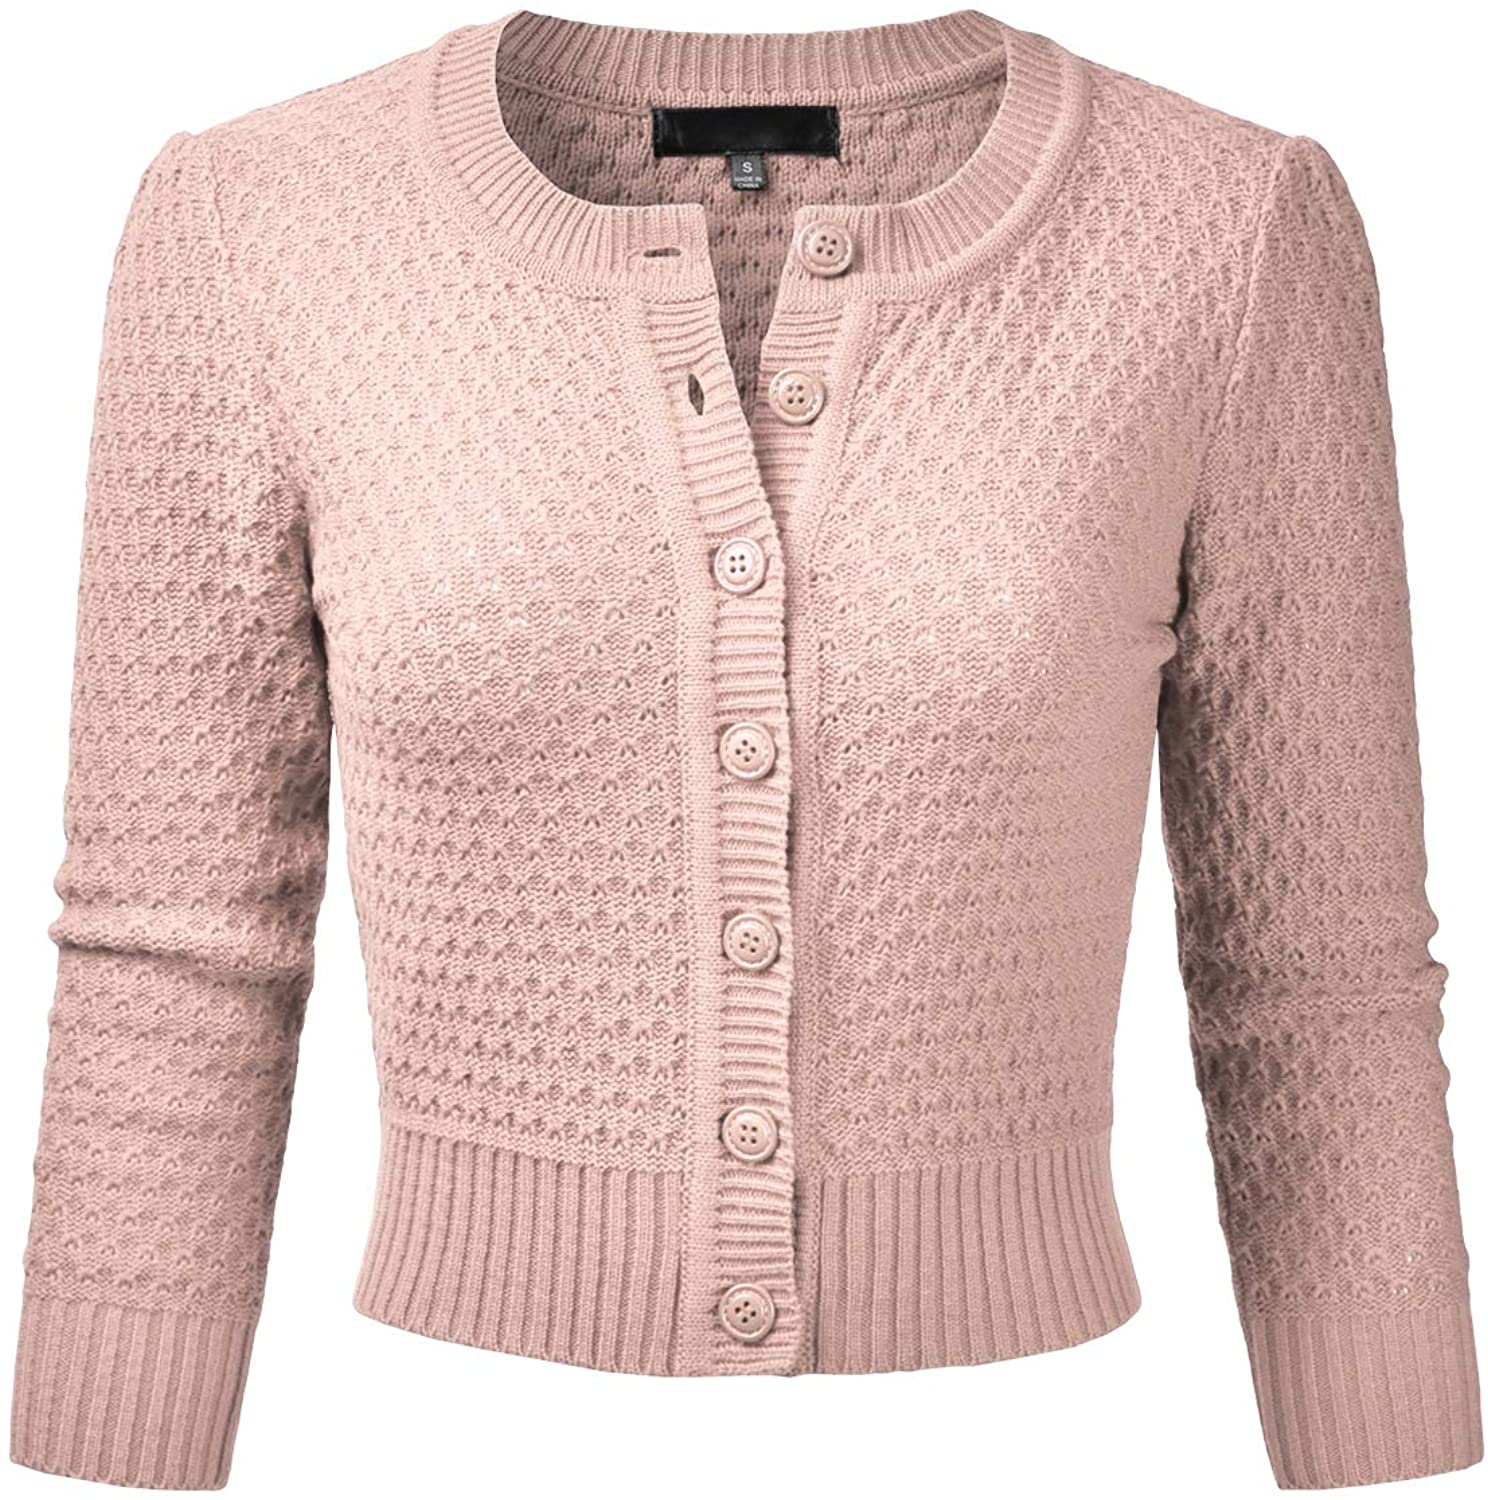 FLORIA Womens Button Down 3/4 Sleeve Crew Neck Cotton Knit Cropped Cardigan Sweater S-3X